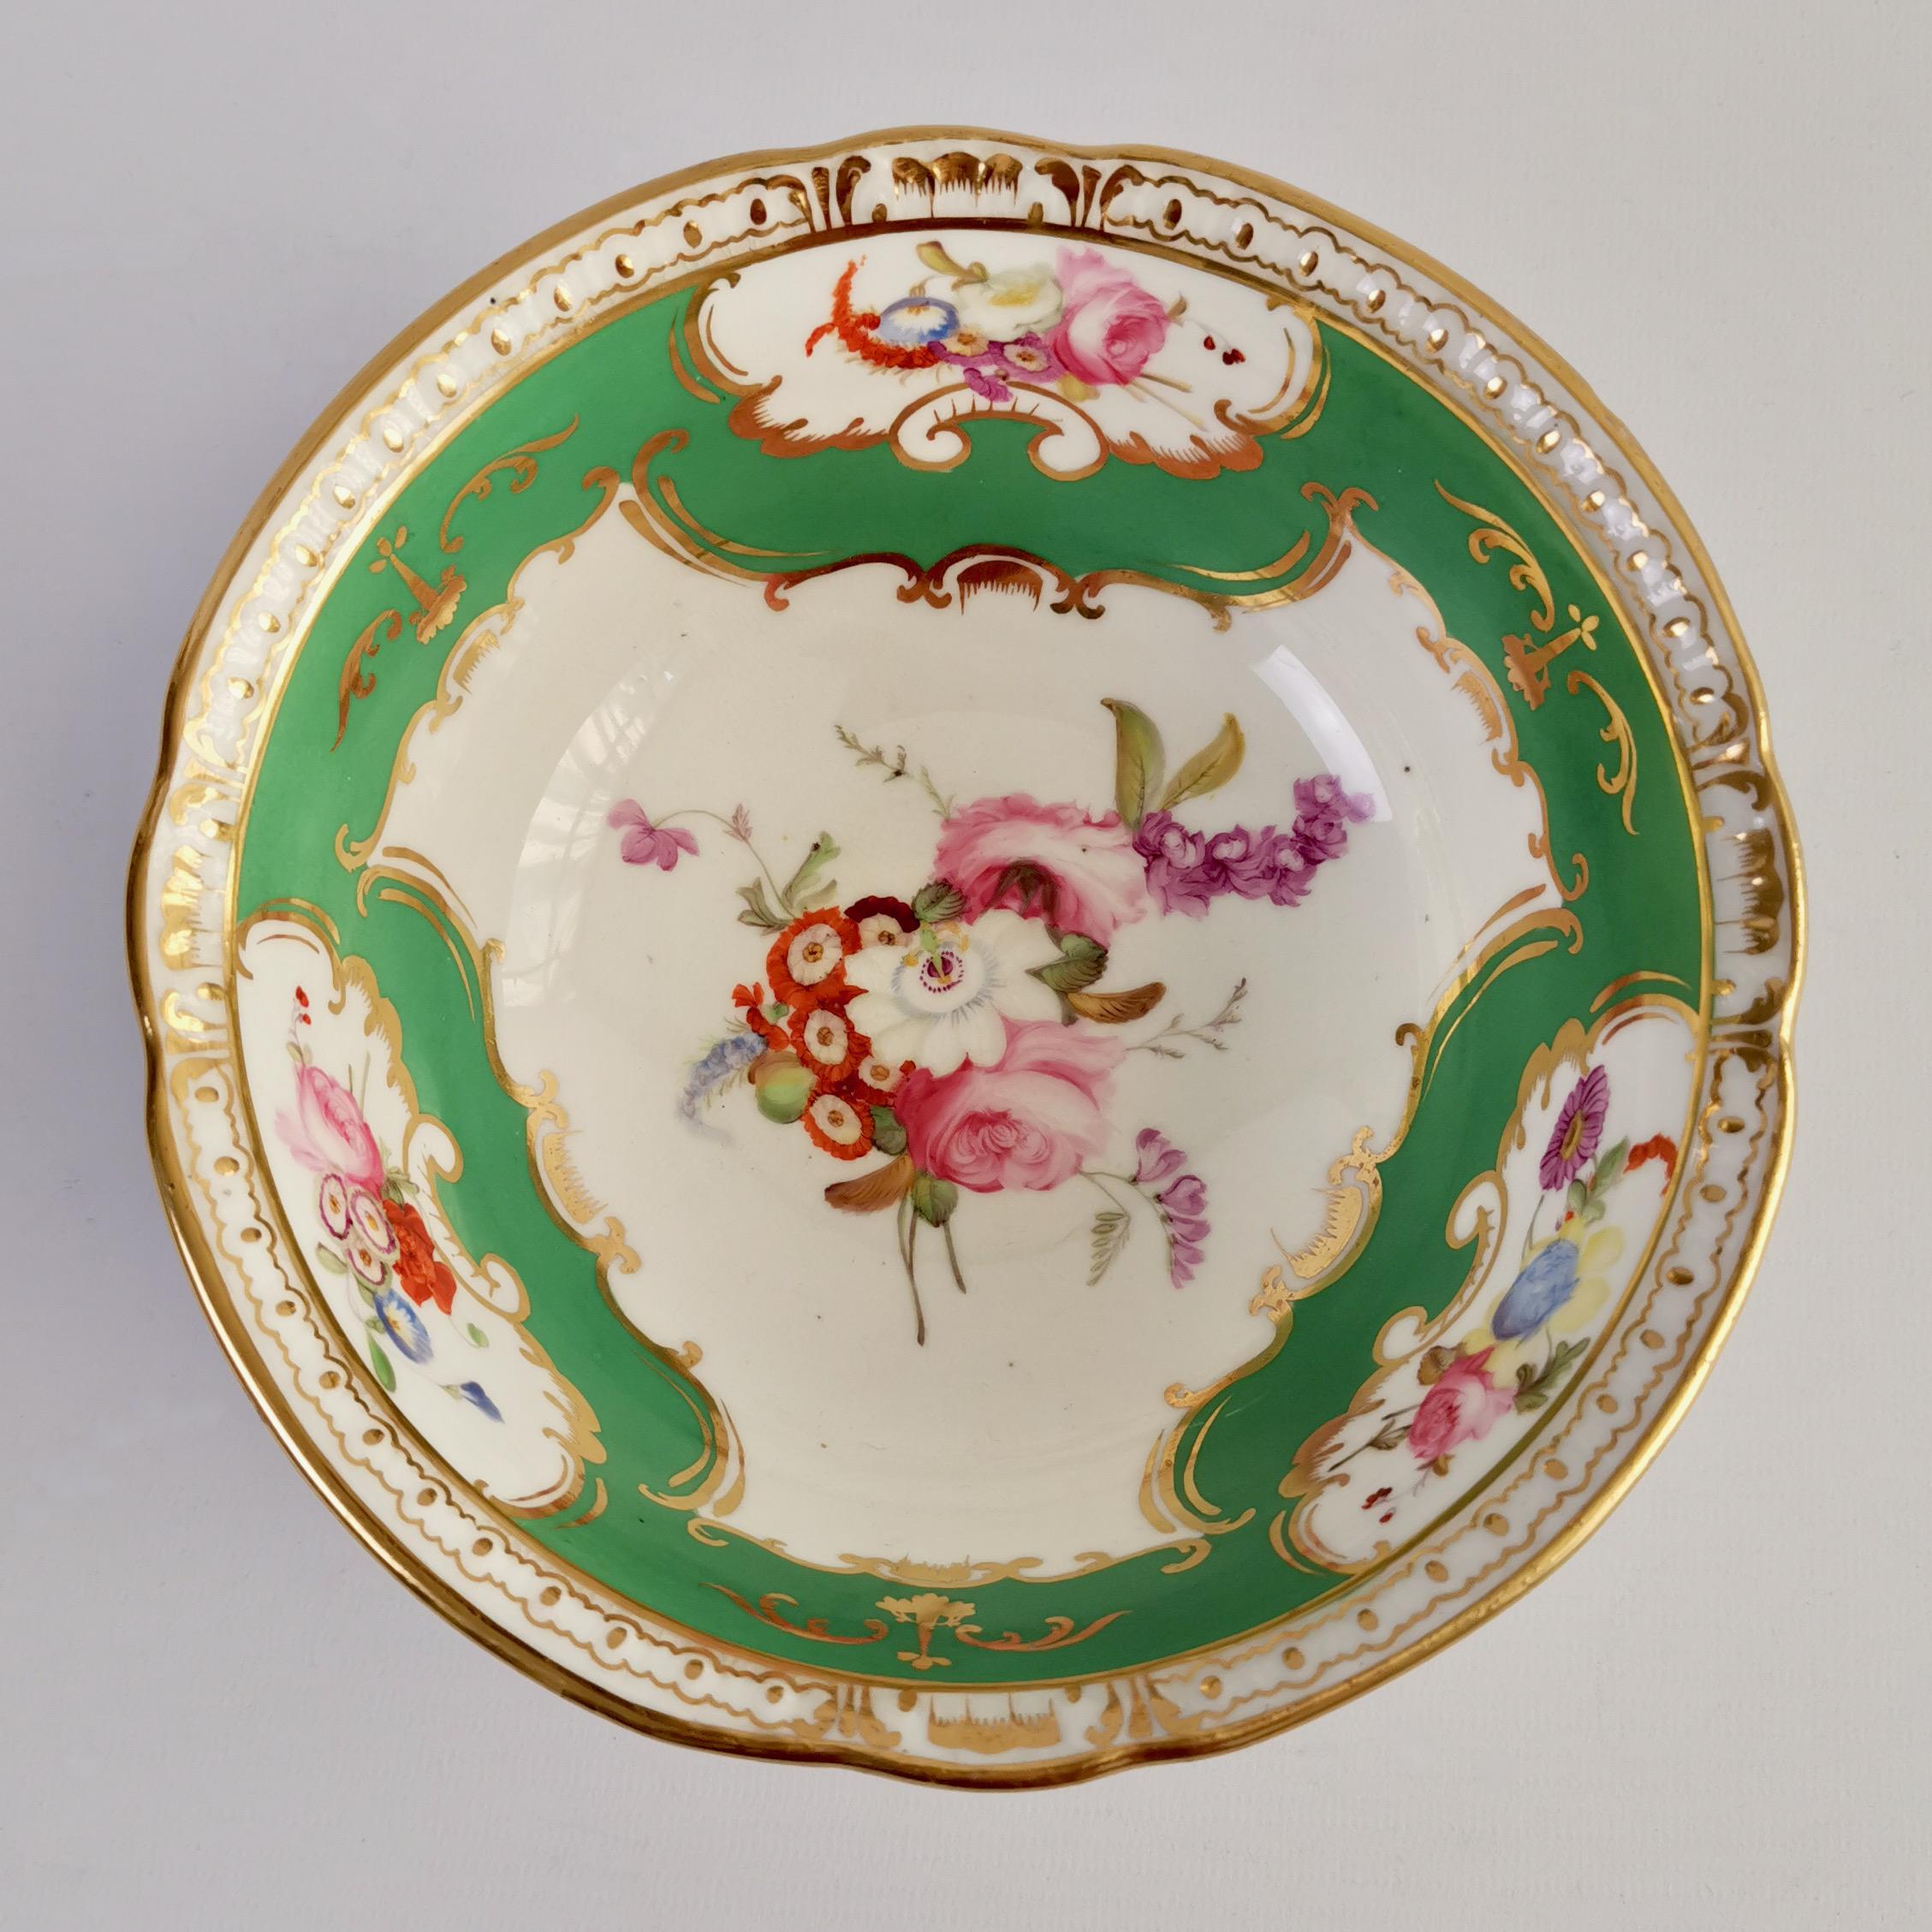 Hand-Painted Coalport Porcelain Slop Bowl, Green with Flowers, Regency, circa 1826